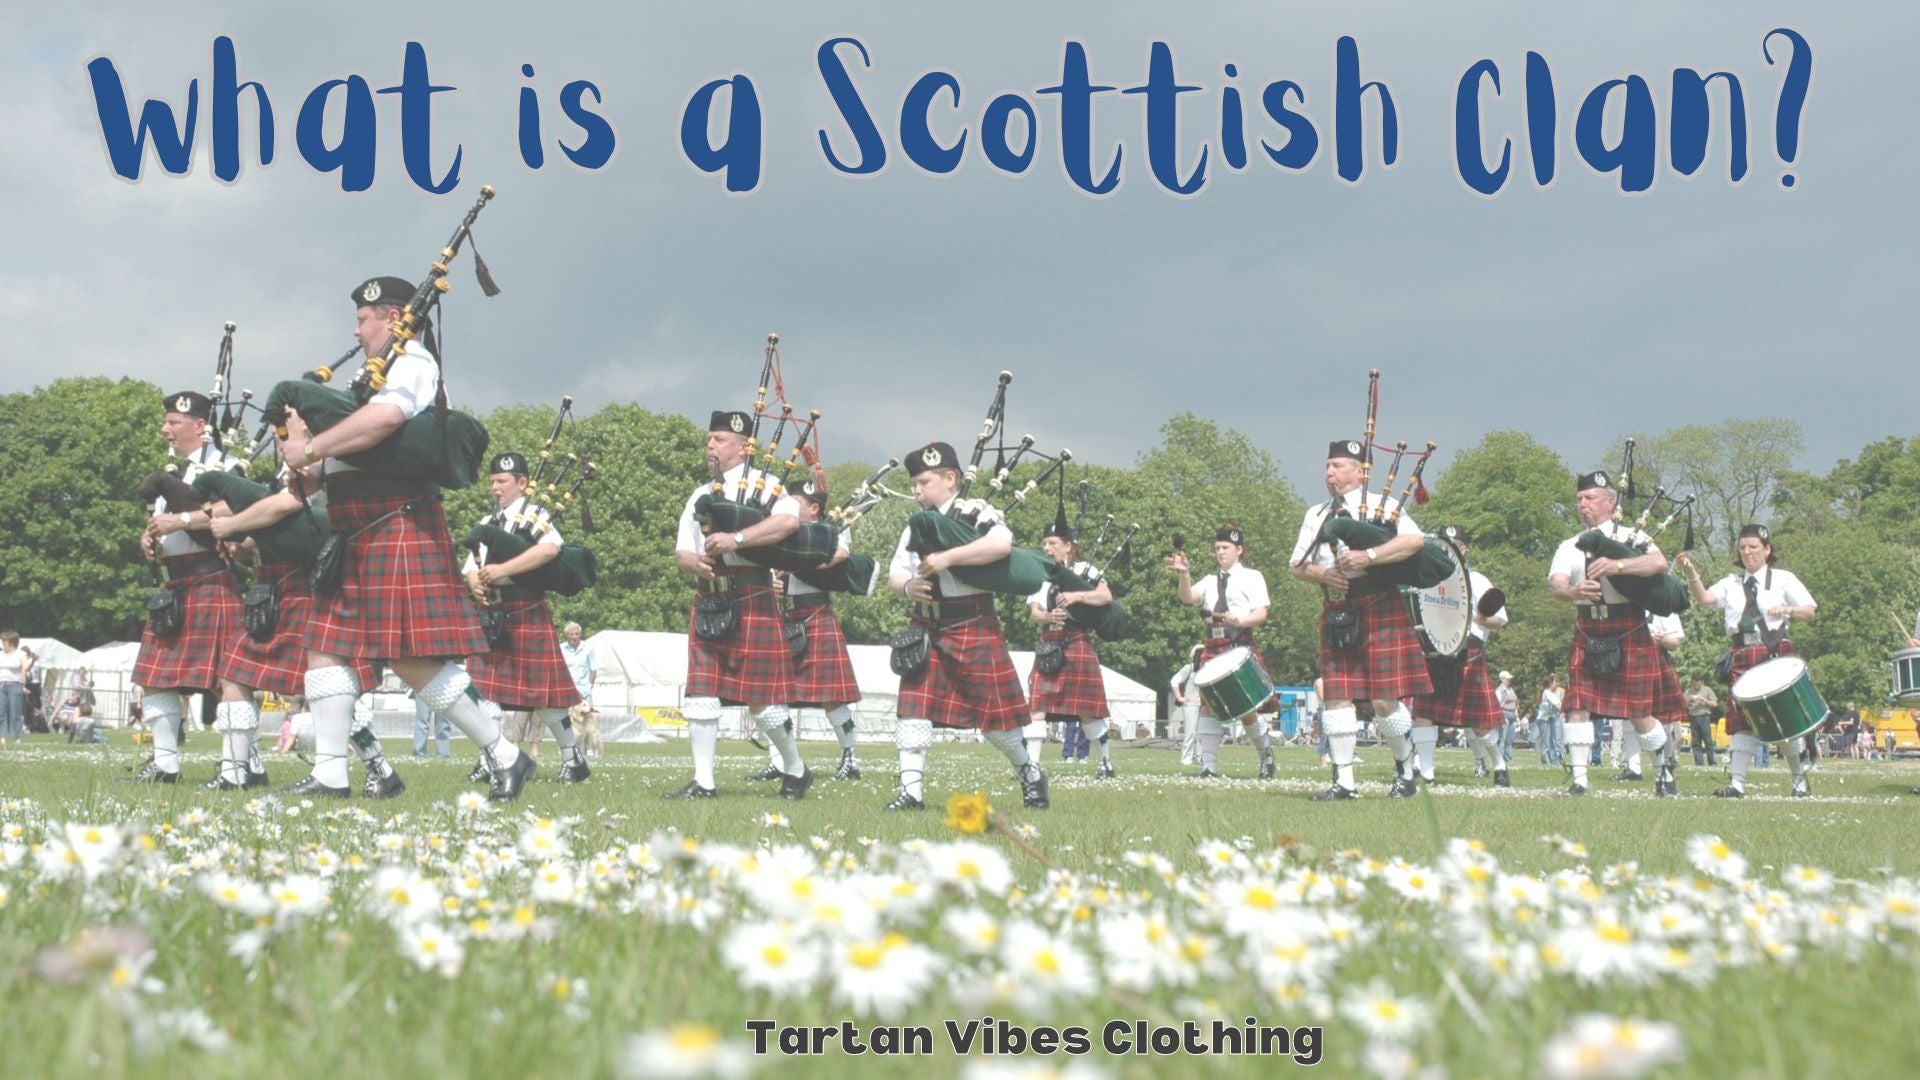 What is a scottish clan?